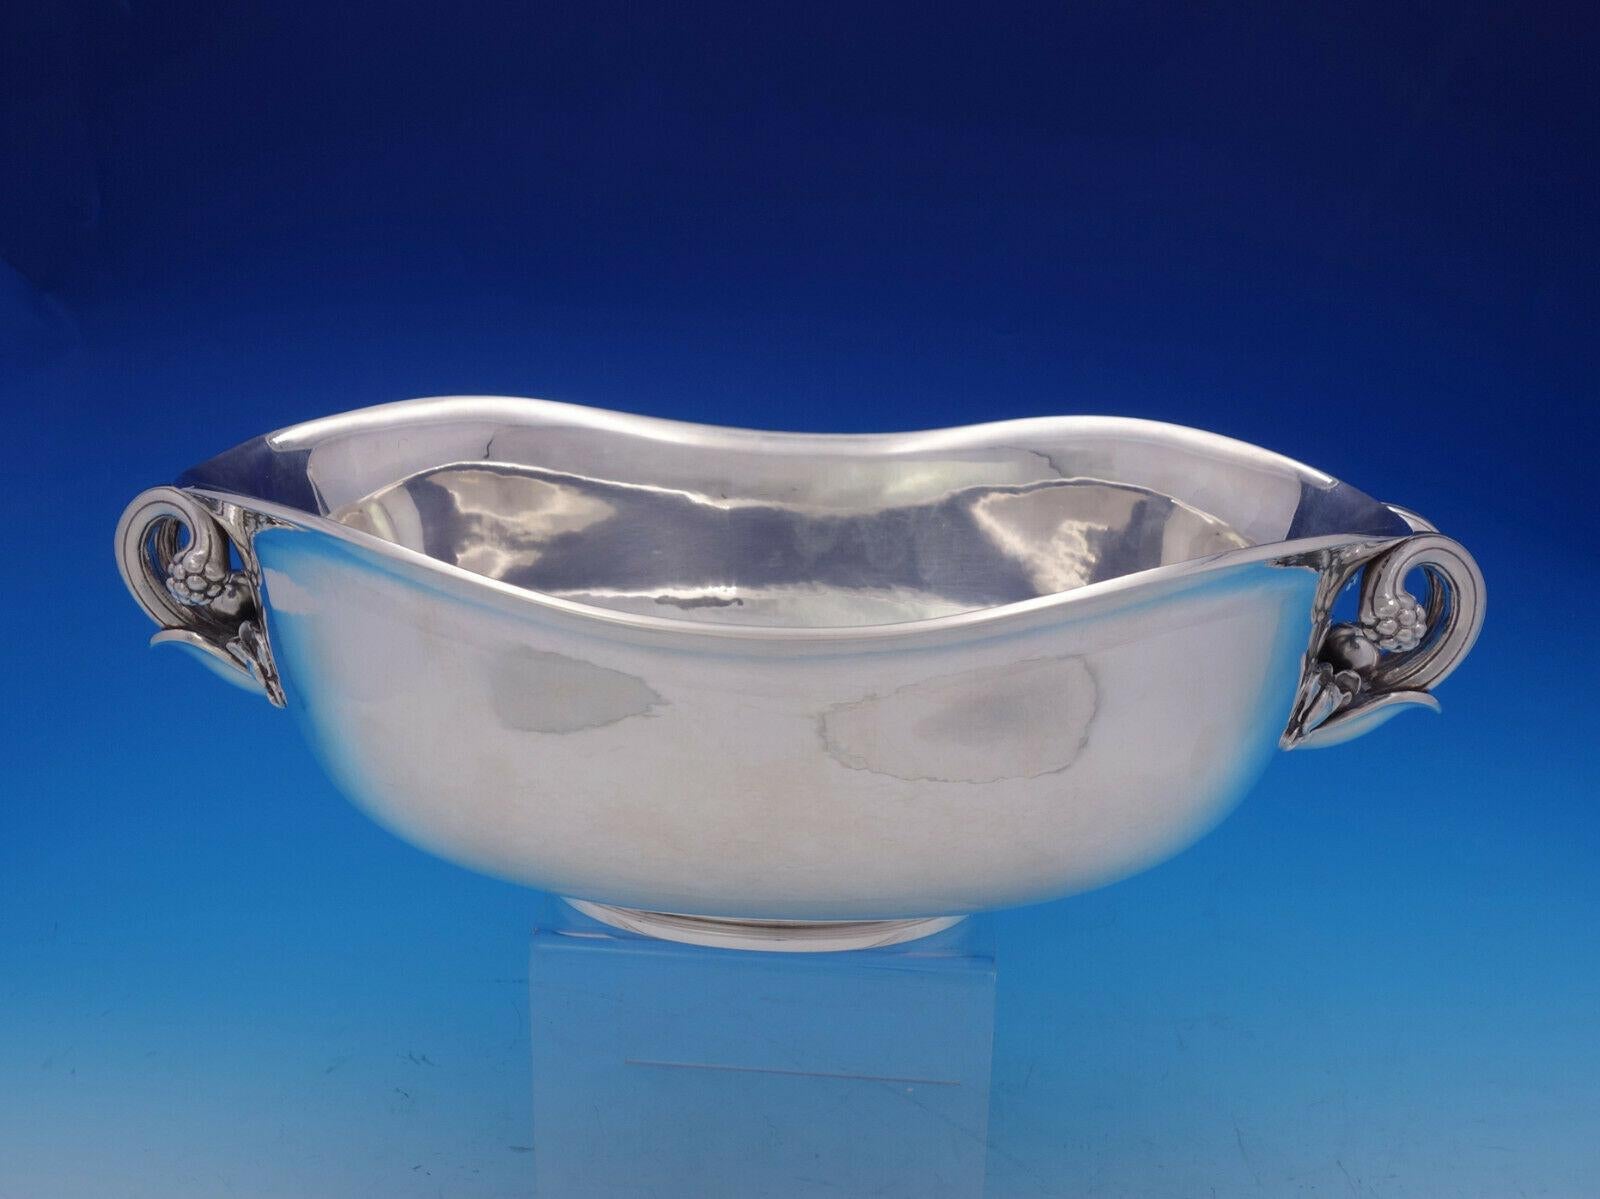 Georg Jensen

Superb Georg Jensen large oval sterling centerpiece bowl #650A designed by Harald Nielsen. This exquisite, oval shaped centerpiece bowl has a unique bowed shape and is double handled. Each cast and applied handle has intricate